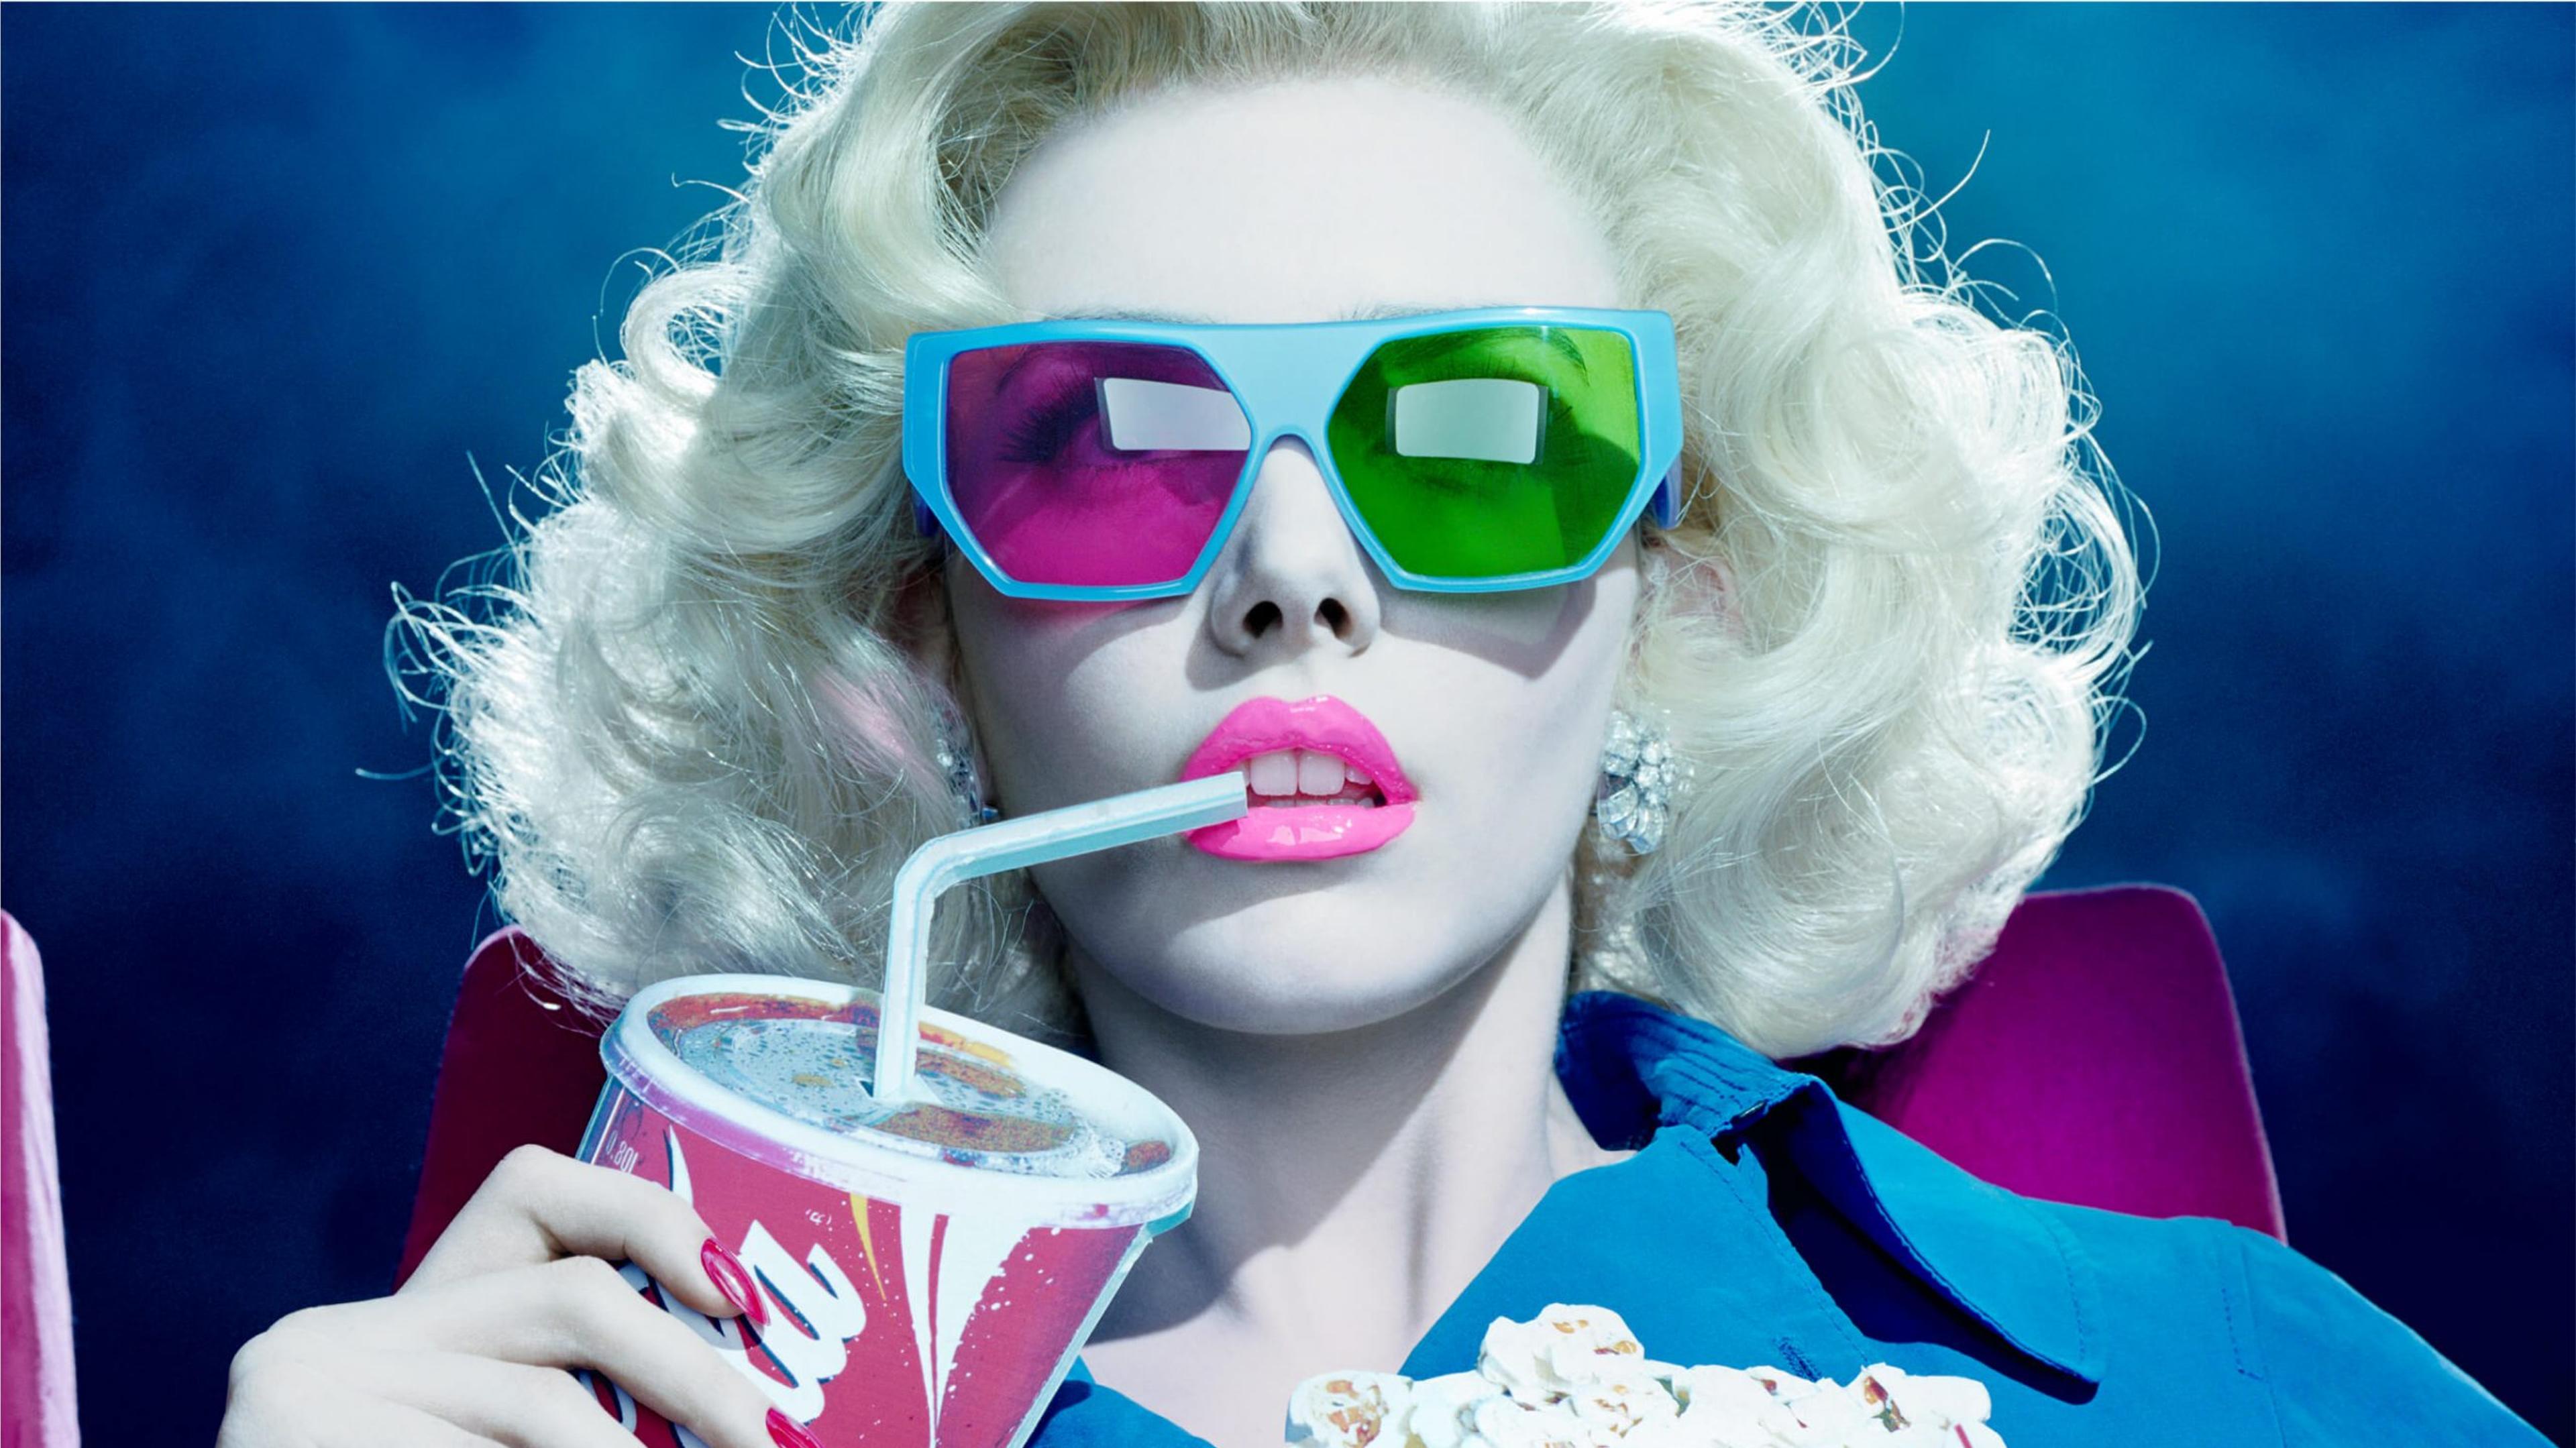 A close-up portrait of a woman with light blonde hair and pink-and-green 3D glasses sitting in a movie theater sipping a Coke